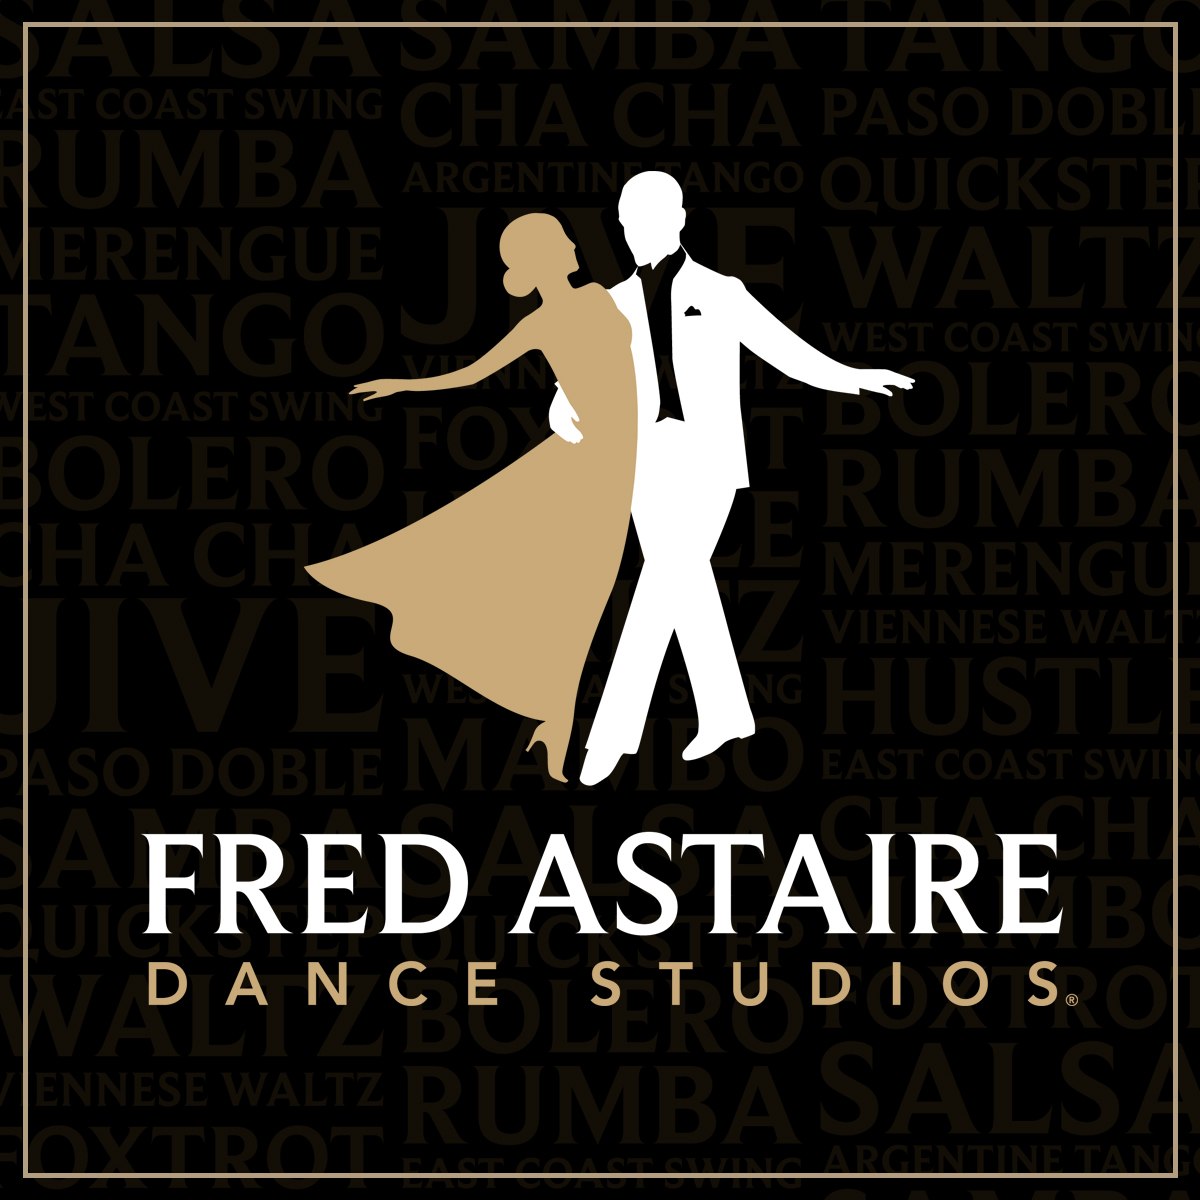 Fred Astaire Dance Studios Logo with white and gold silhouette of two dancers in a moving embrace